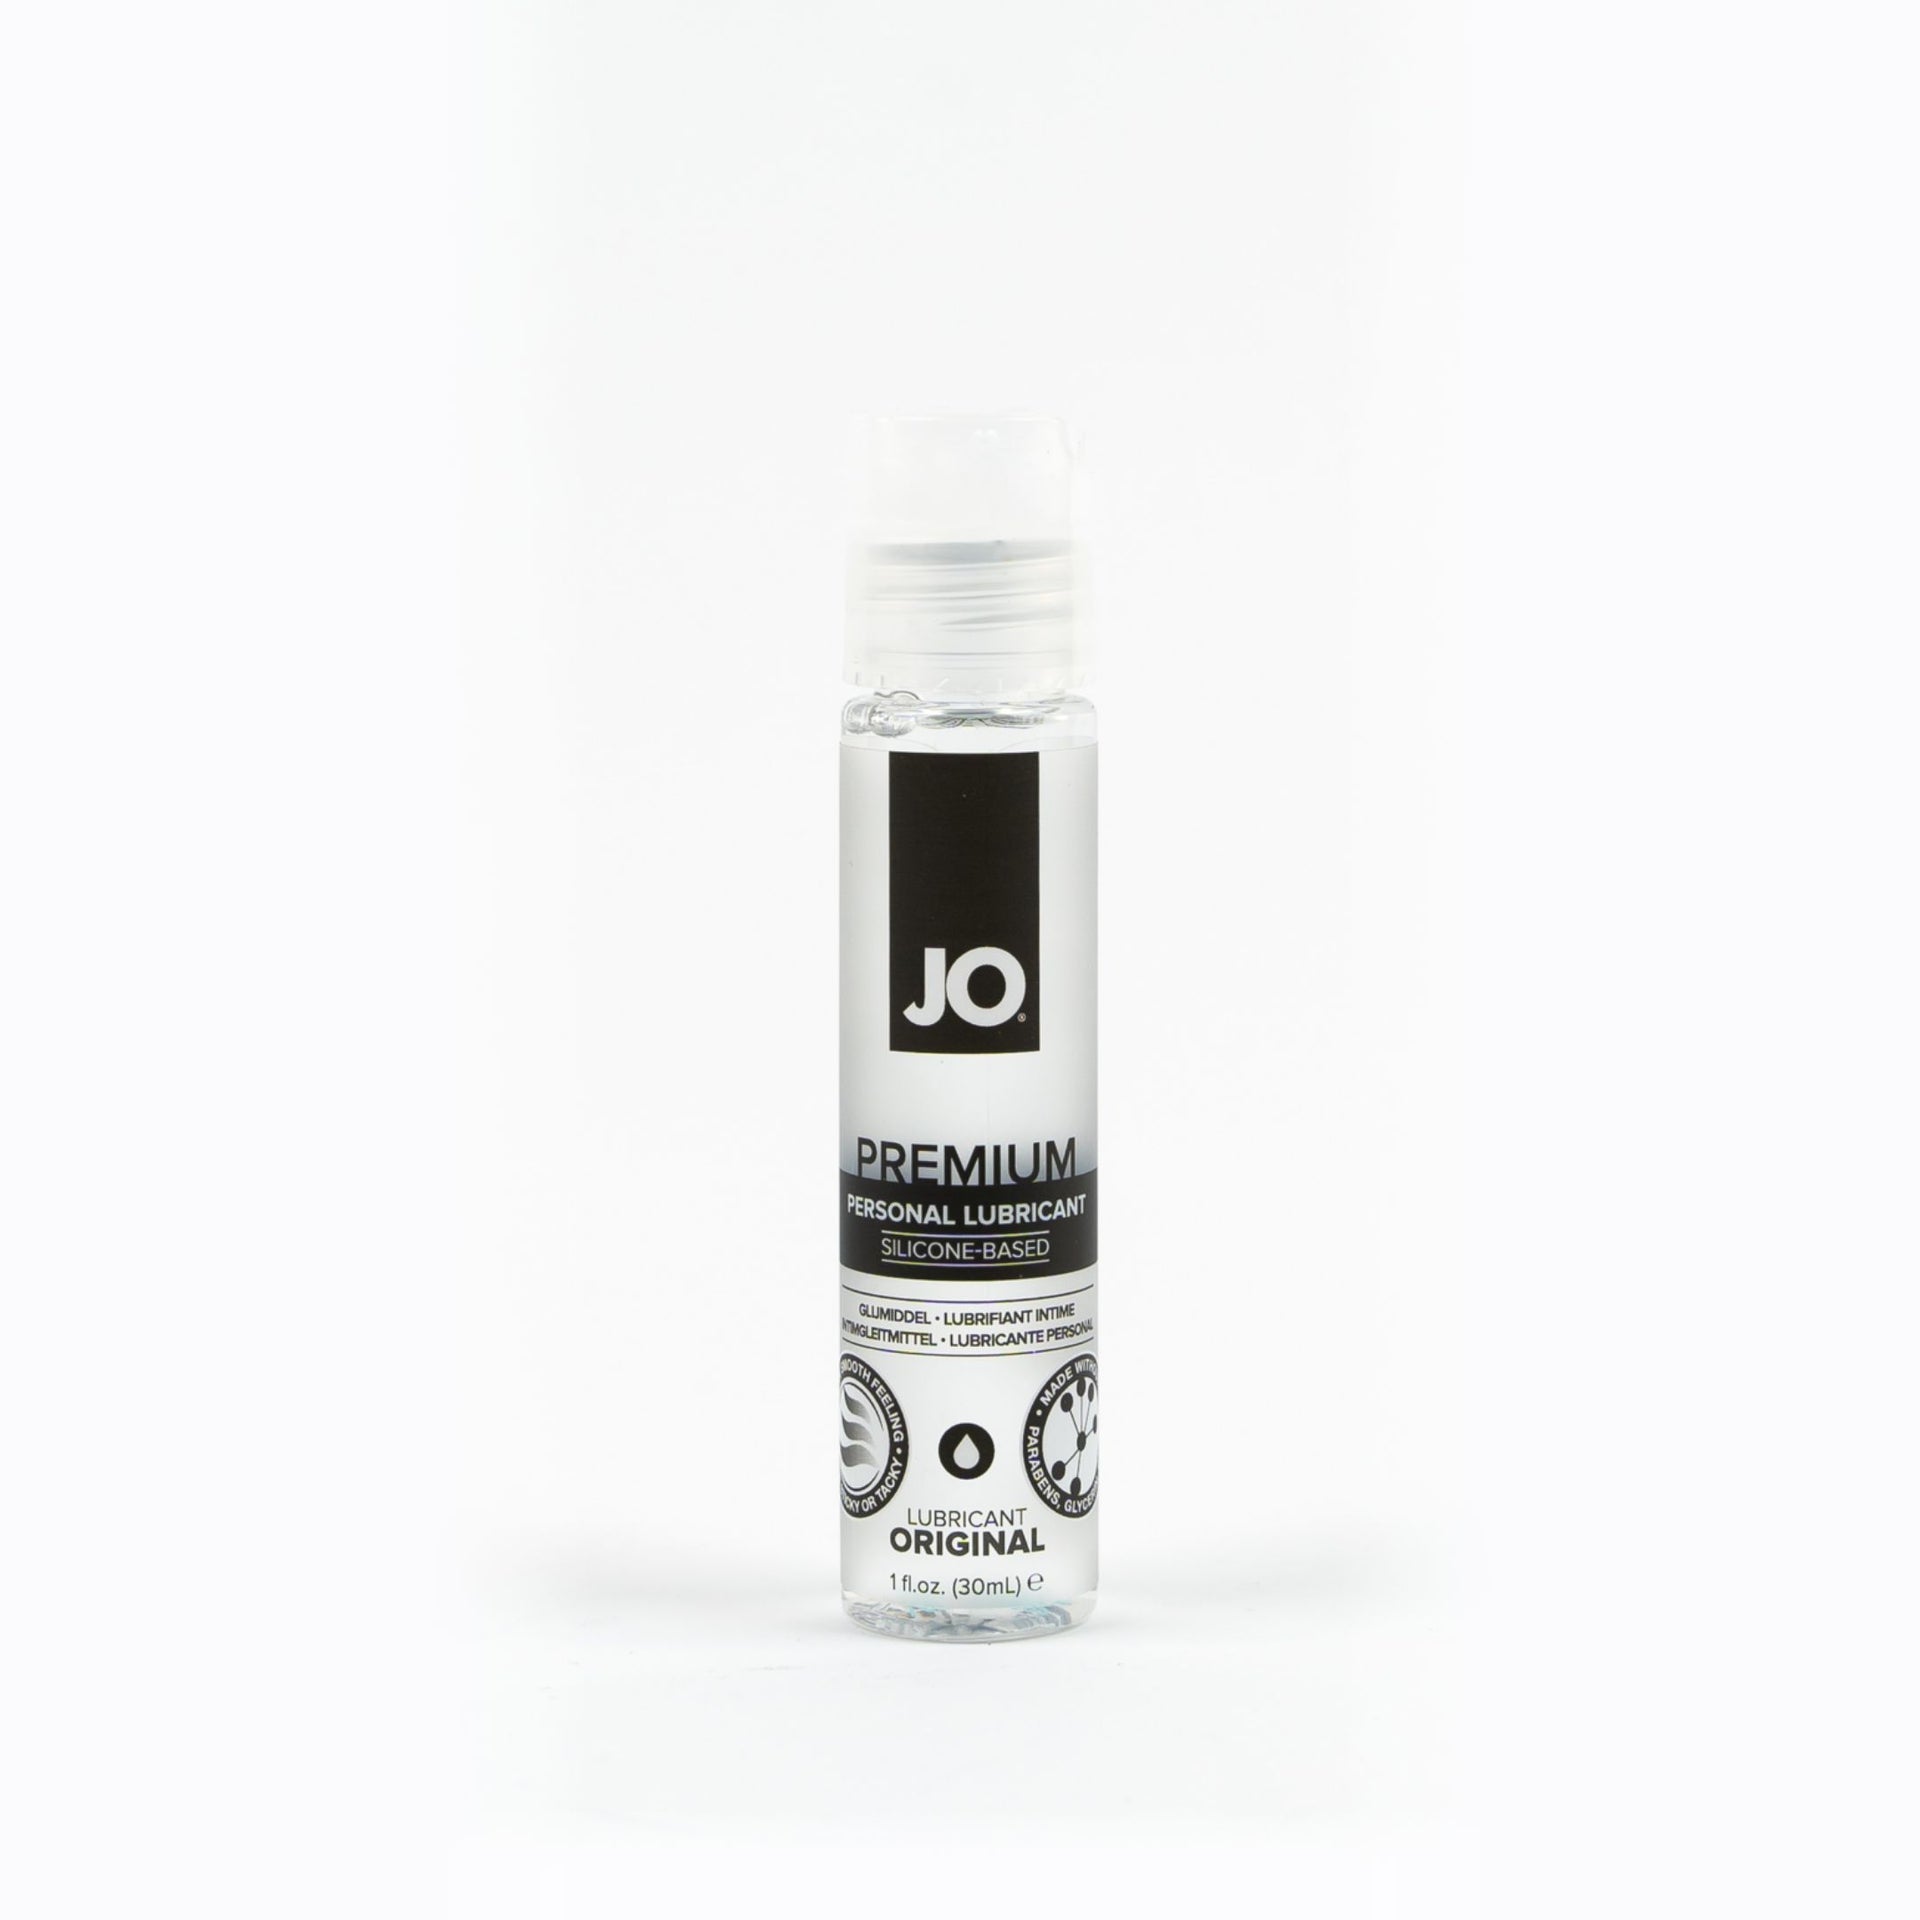 SILICONE LUBRICANT